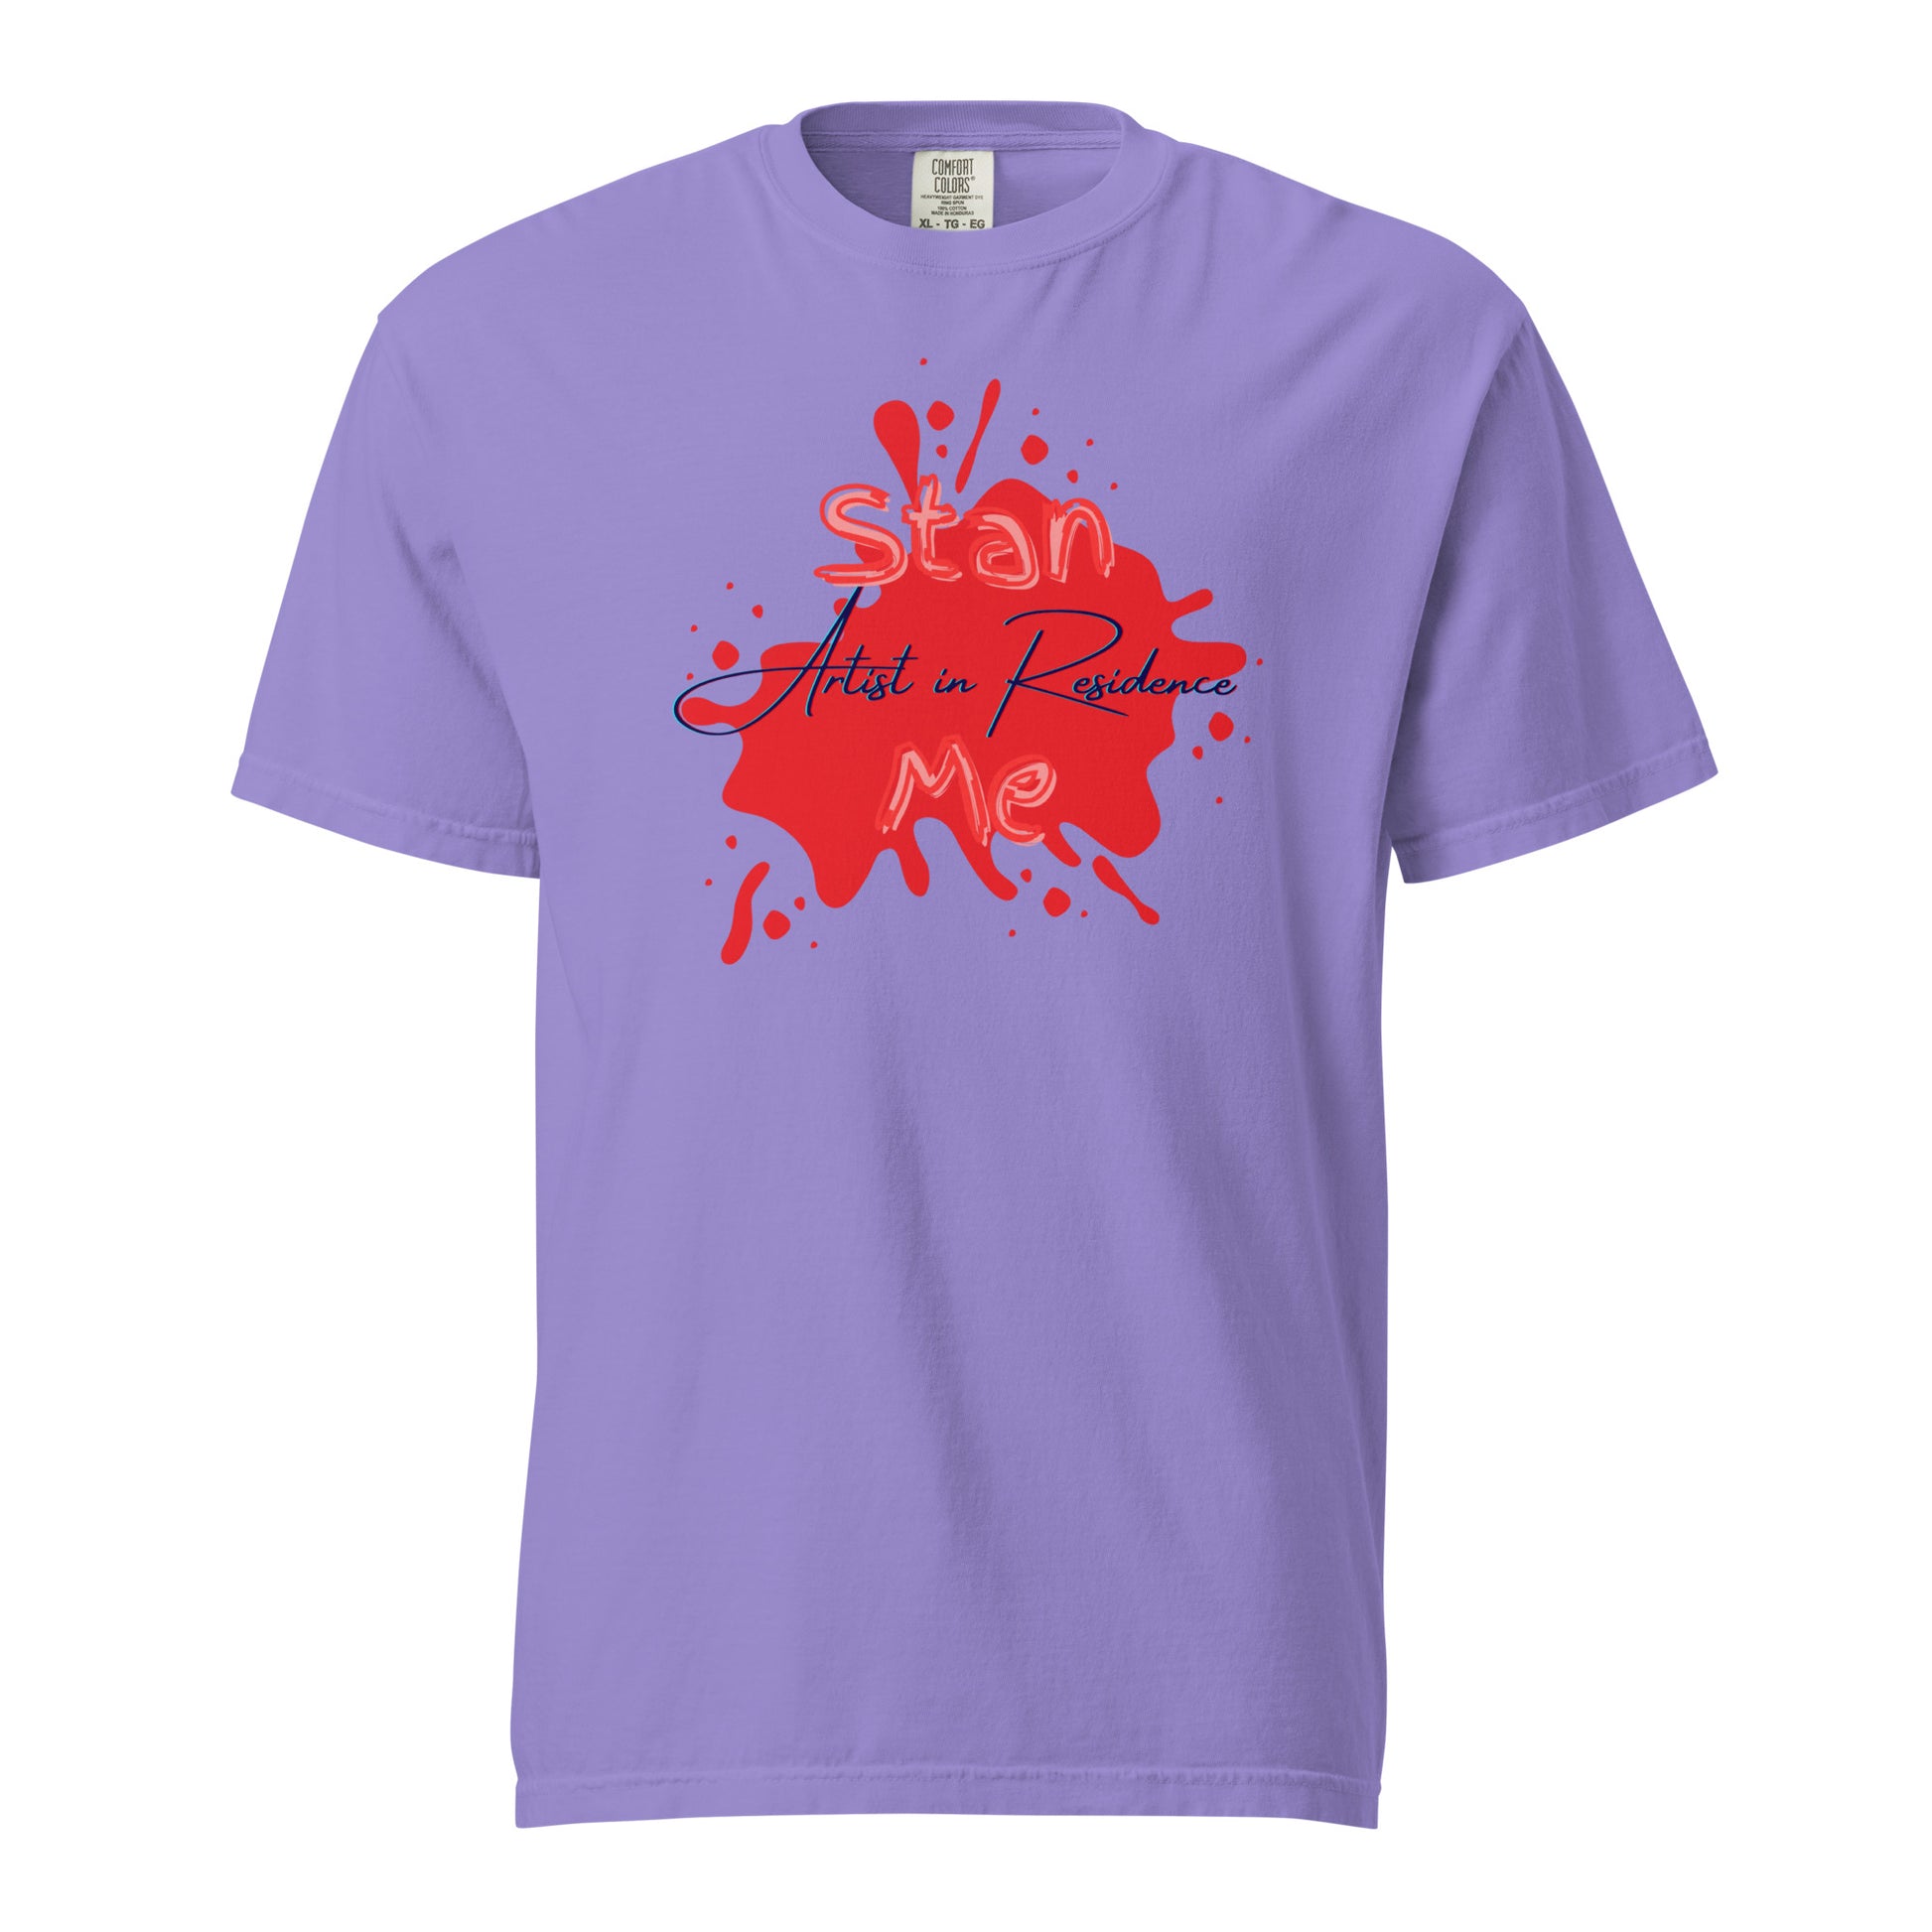 “Stan Me, Artist in Residence” tees featuring paint splatter designs, blending artistic creativity with stan culture. Available in 8 unique styles. Perfect for artists looking to attract fans and gigs. purple